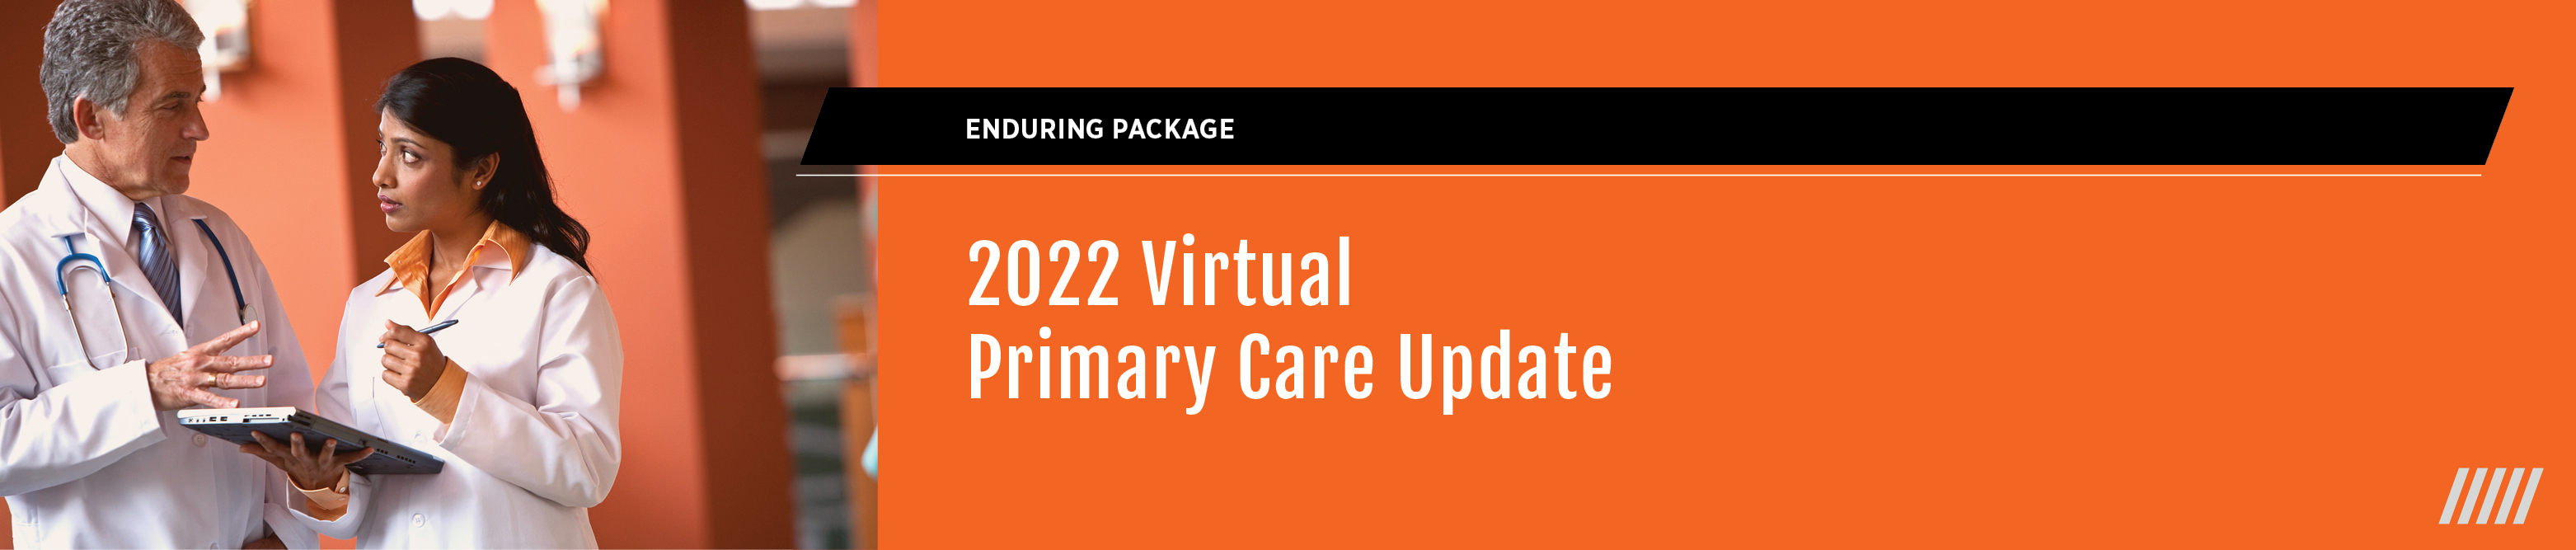 2022 Primary Care Update - Enduring Package Banner